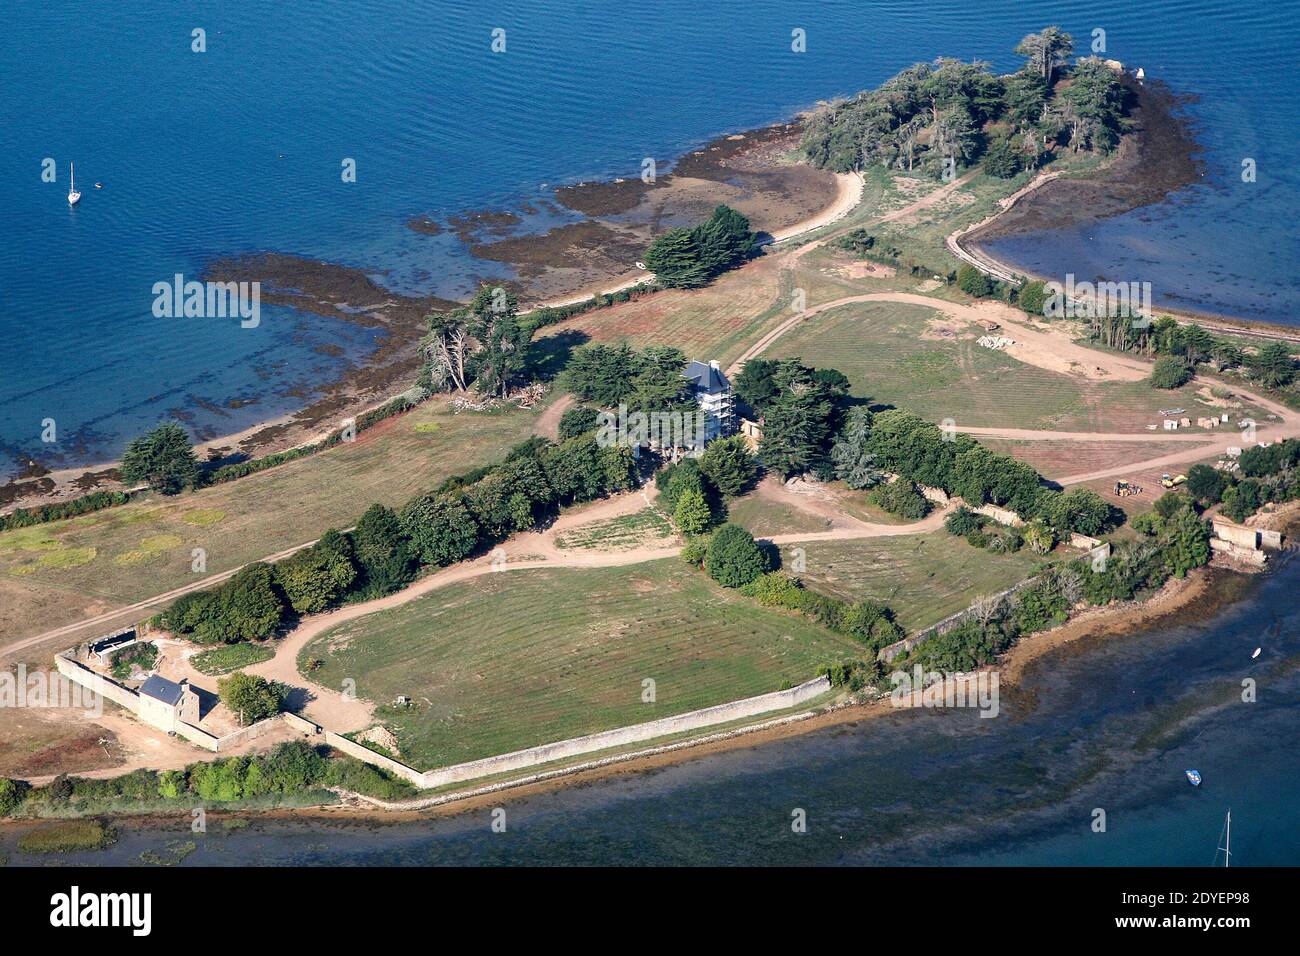 File picture dated July 27, 2011 showing Boedic island in the Morbihan  gulf, western France, owned by late French lawyer Olivier Metzner. The body  of Metzner was found on March 17, 2013